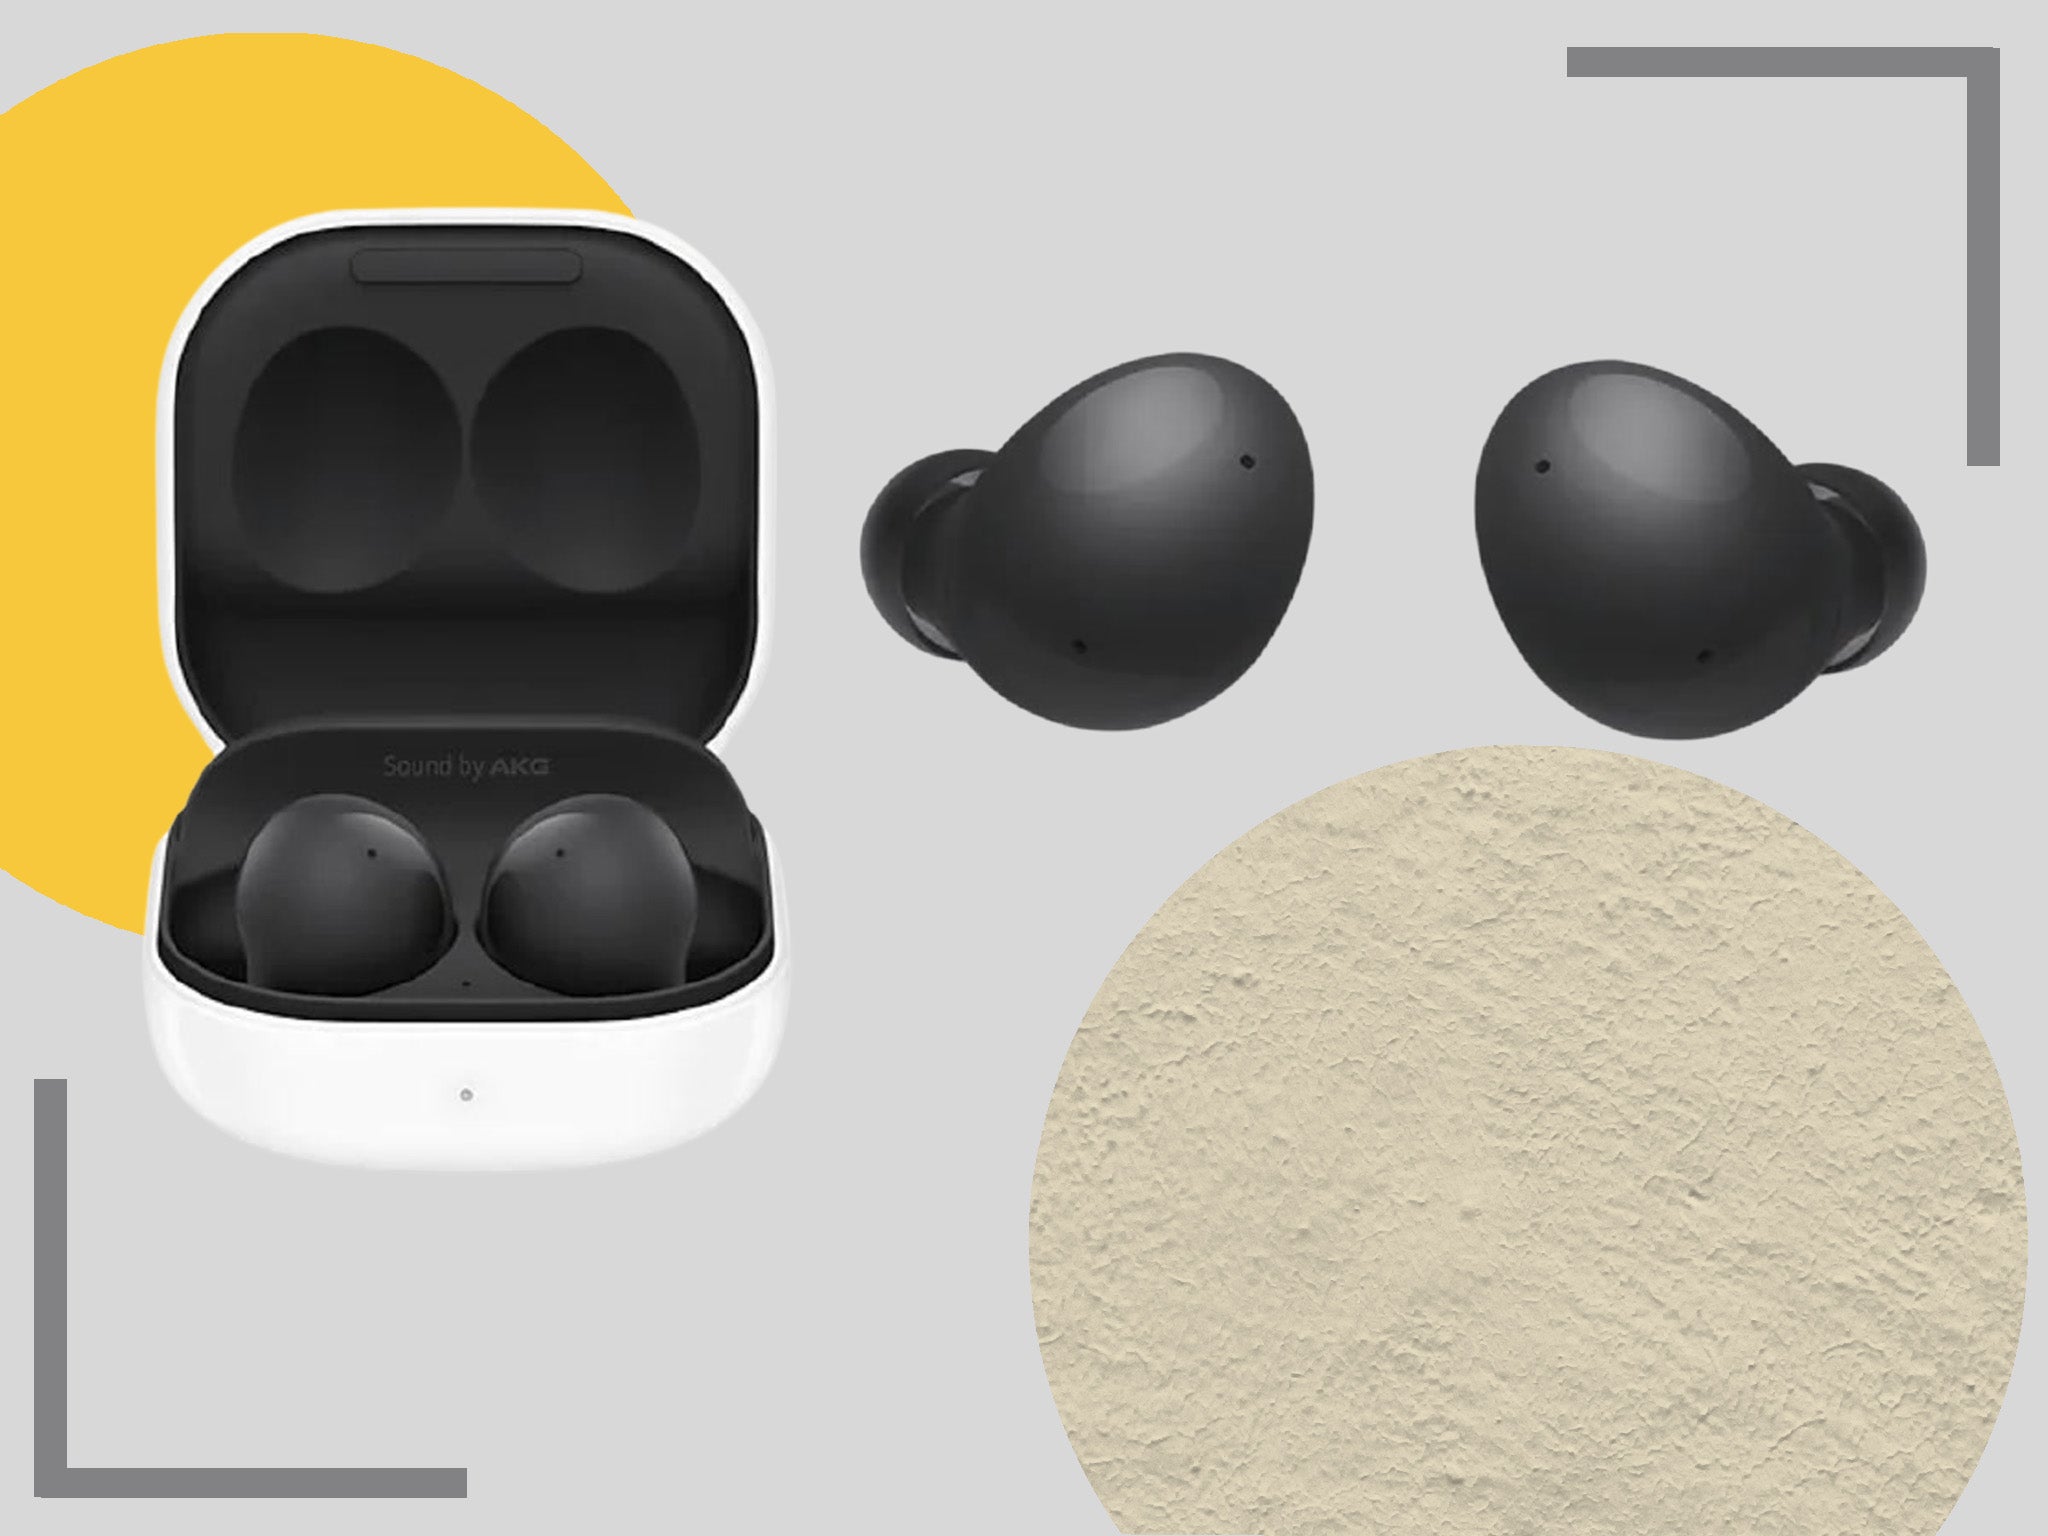 Samsung Galaxy buds 2 review: Premium features, poor battery life